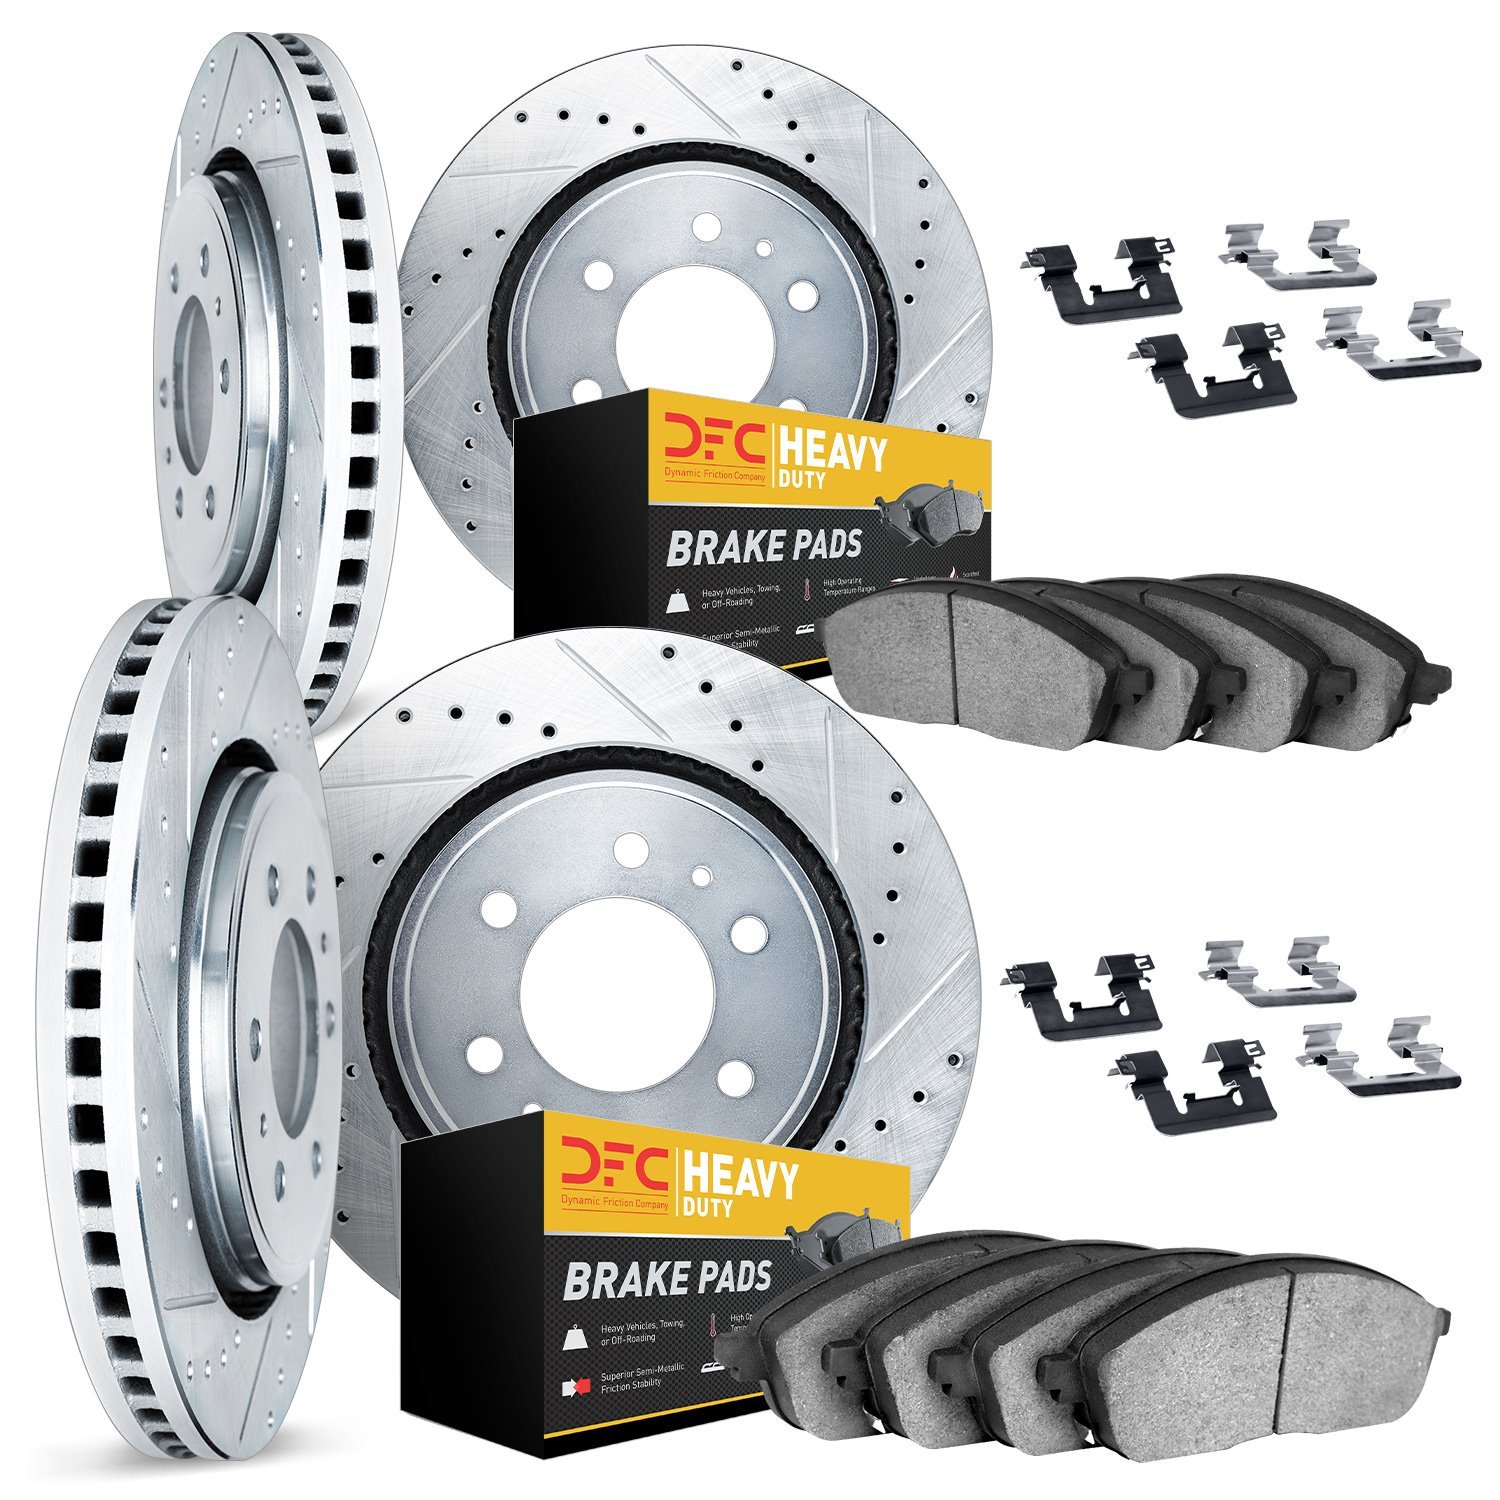 7214-54067 Drilled/Slotted Rotors w/Heavy-Duty Brake Pads Kit & Hardware [Silver], 2009-2009 Ford/Lincoln/Mercury/Mazda, Positio